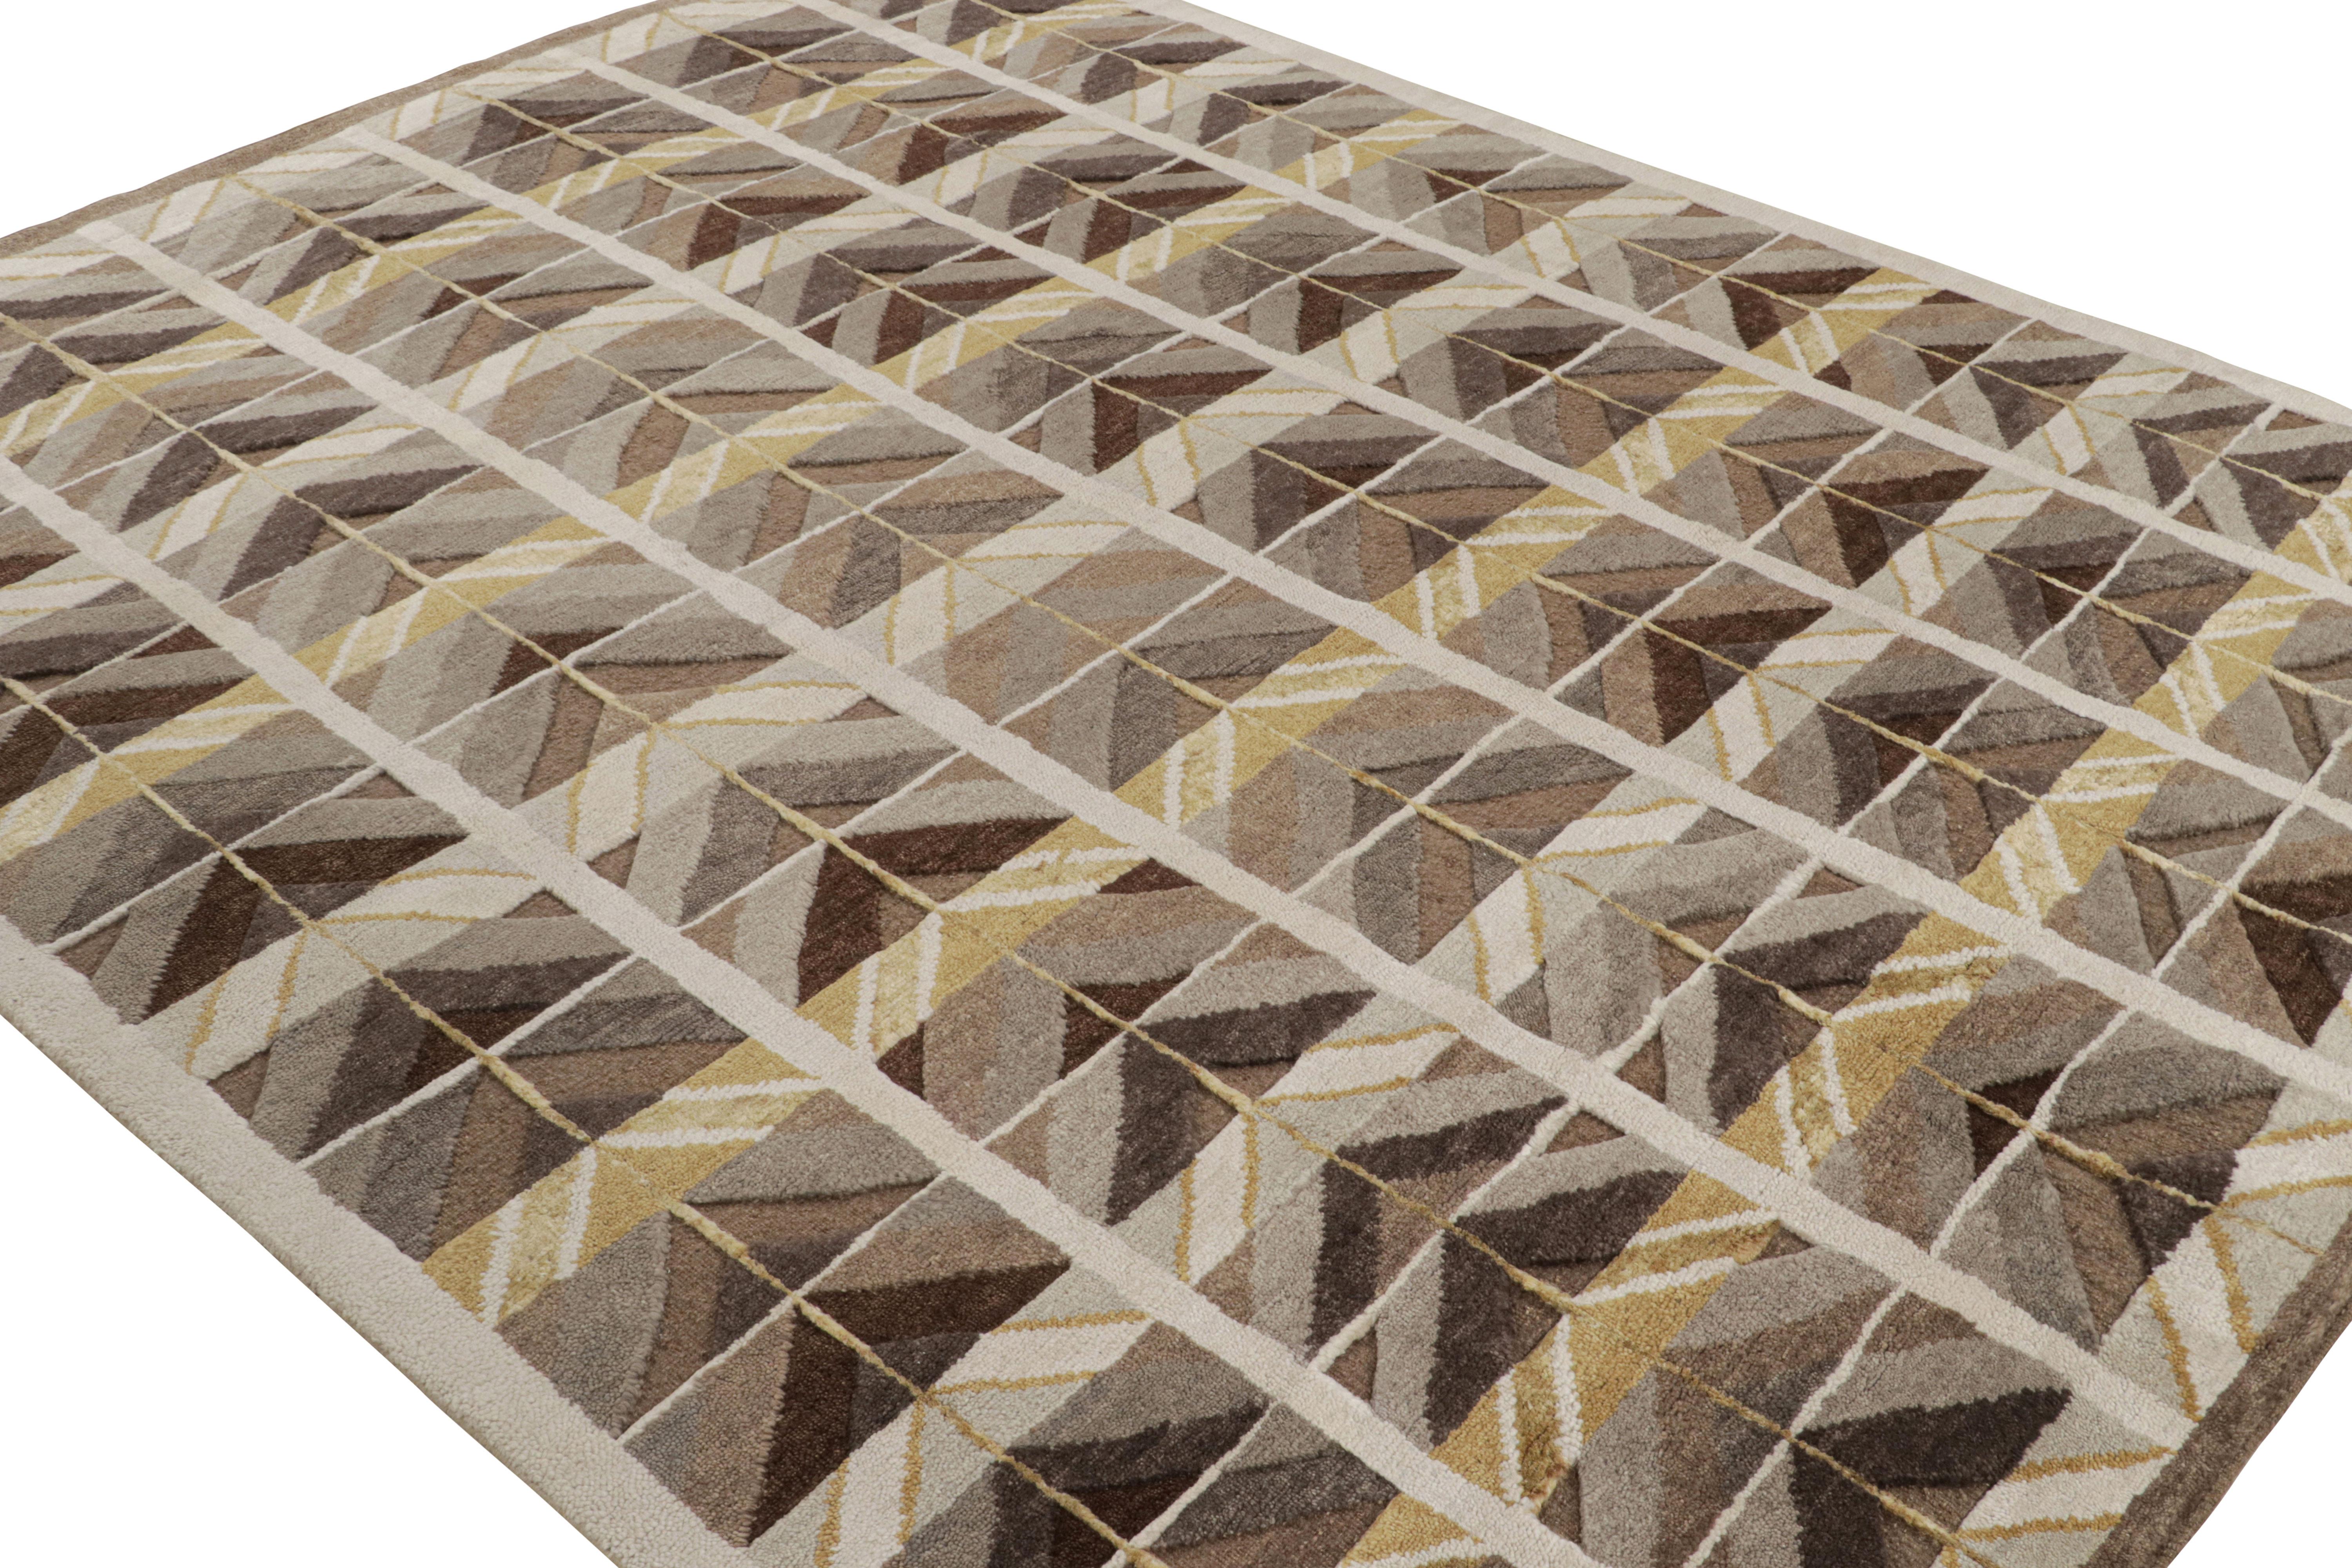 Hand-knotted in wool and silk, this 8x10 Scandinavian rug is from our “High” line, named for its high-low texture married to the geometric patterns inspired by Swedish minimalist aesthetics. 

On the design: 

In this particular rug, taupe,